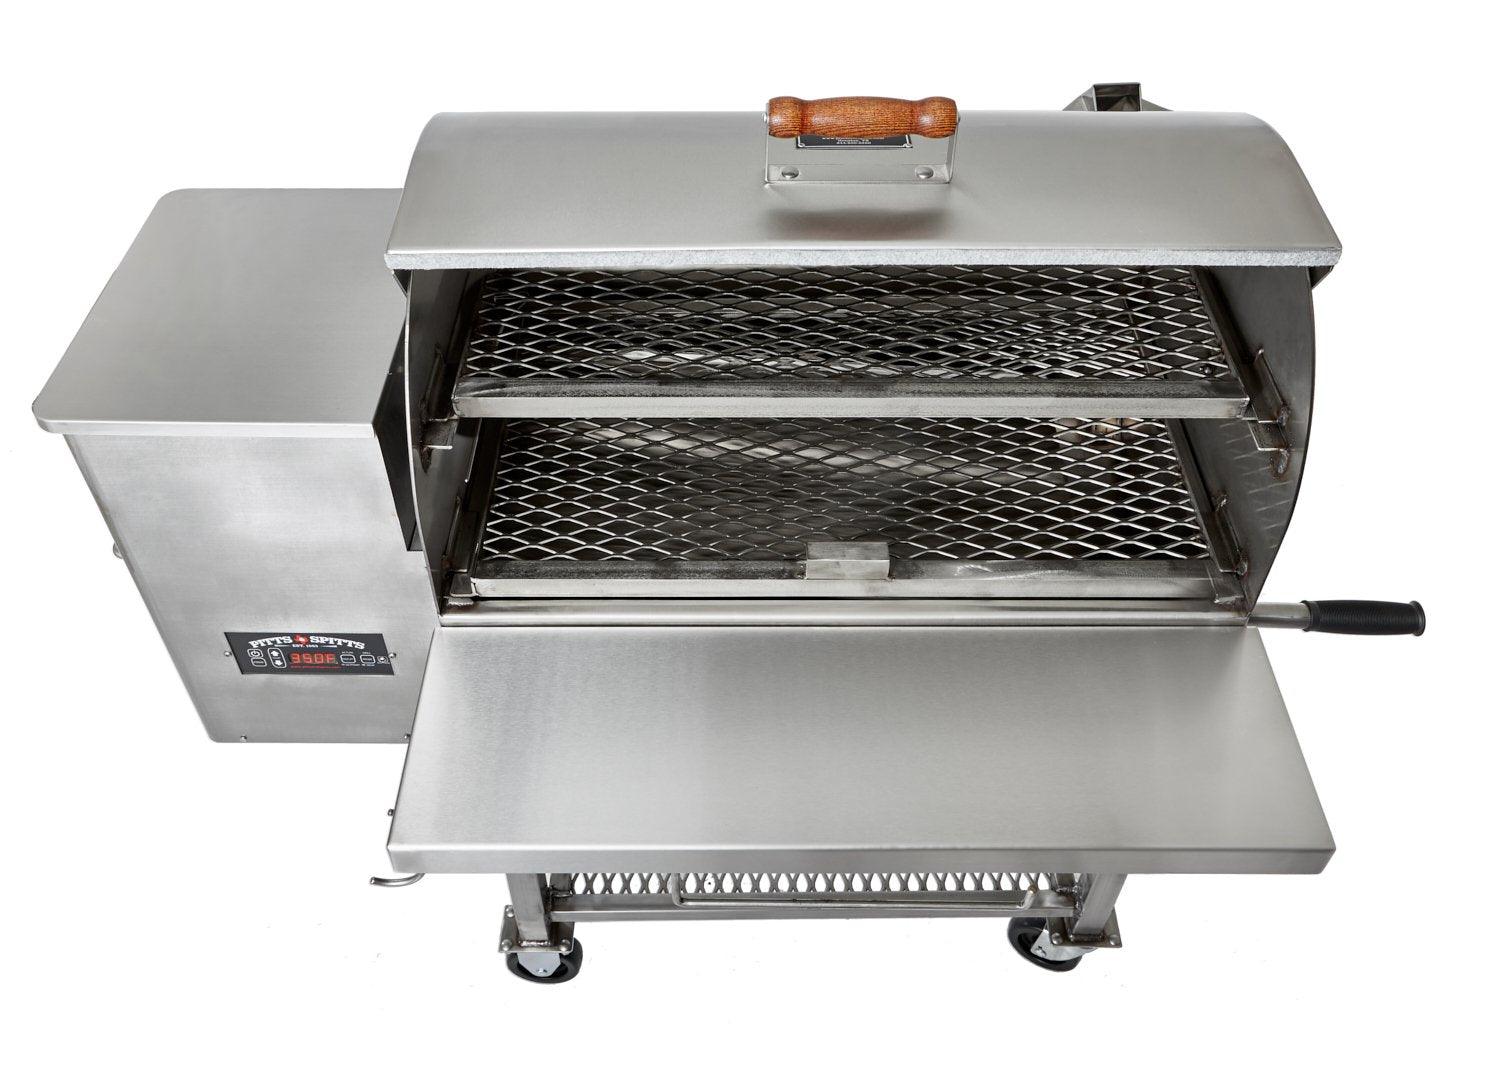 Pitts & Spitts Maverick 850 Stainless Steel Pellet Grill Pitts & Spitts Indigo Pool Patio BBQ